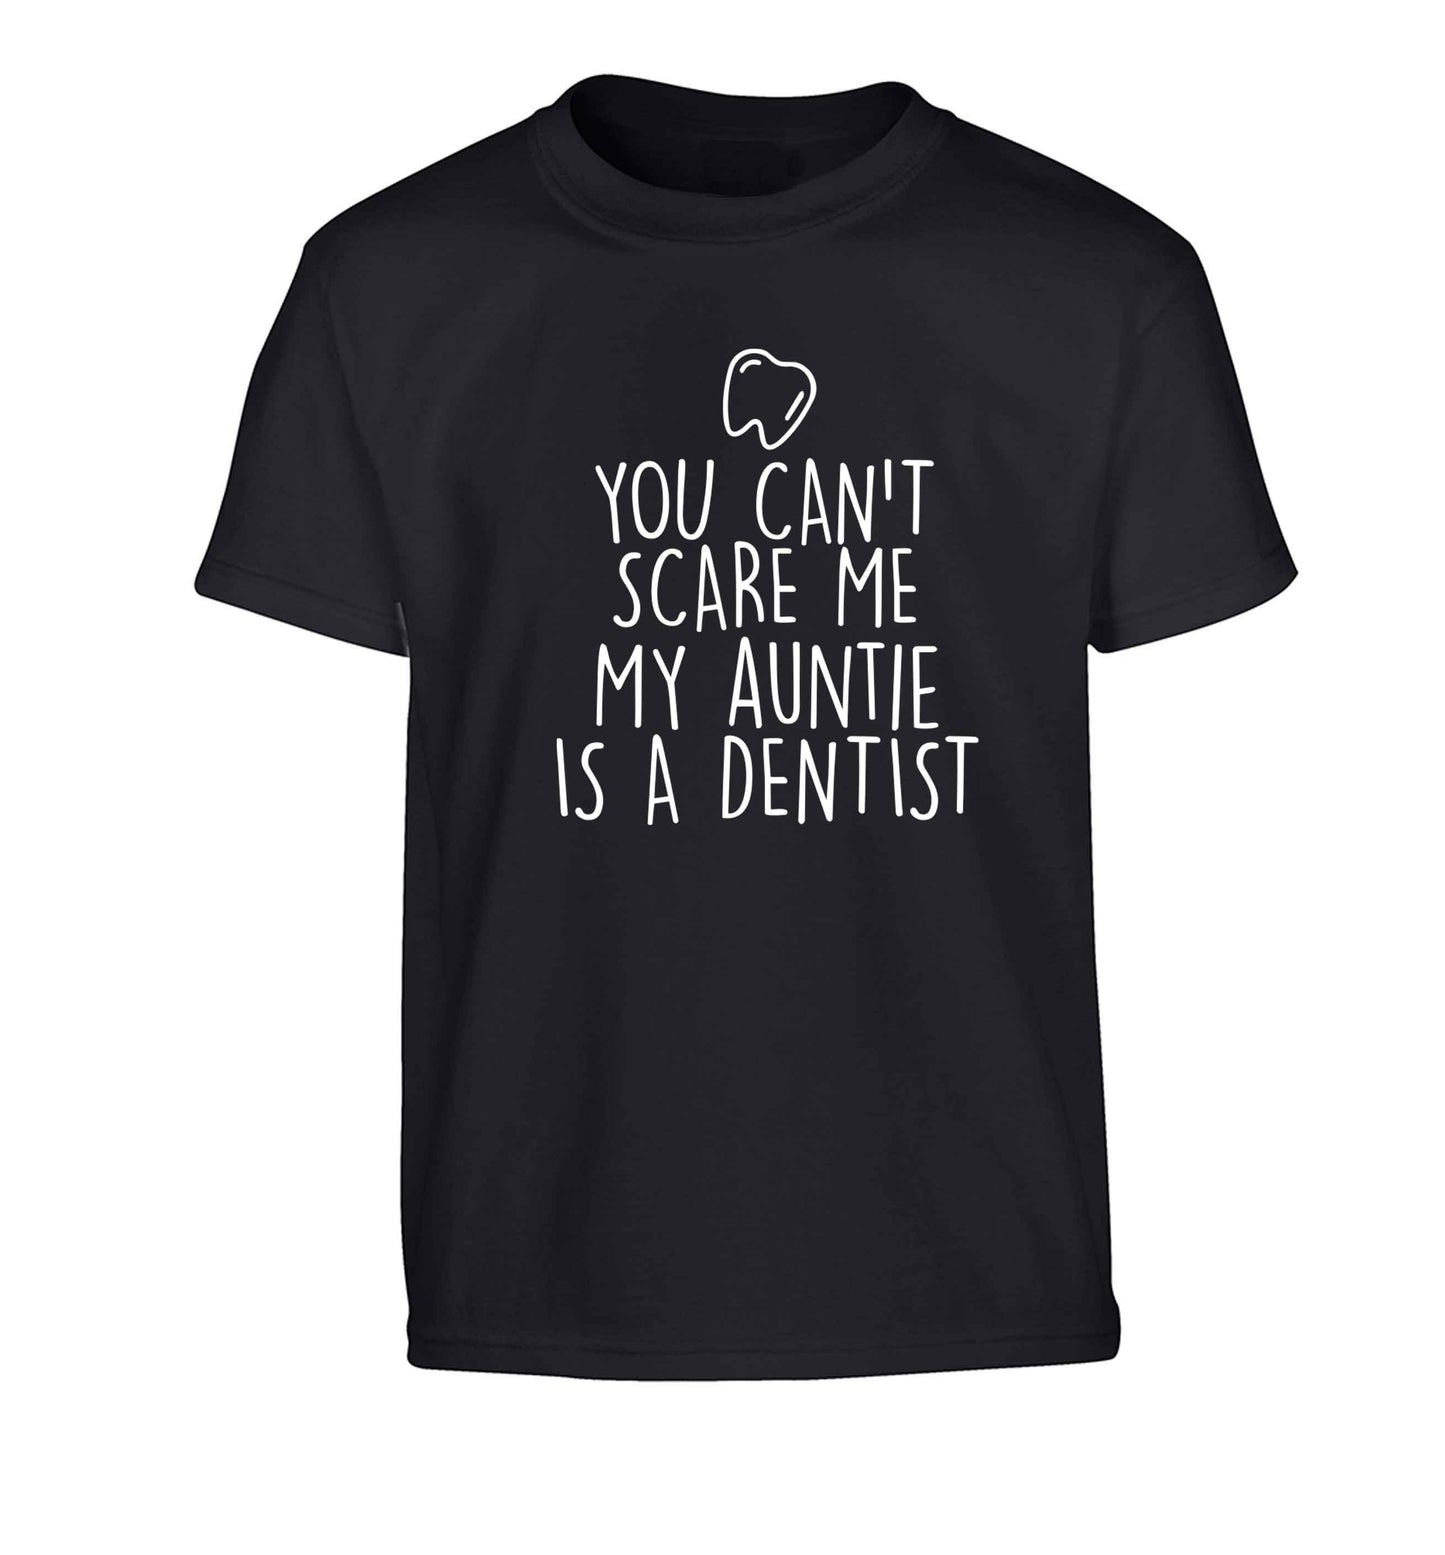 You can't scare me my auntie is a dentist Children's black Tshirt 12-13 Years